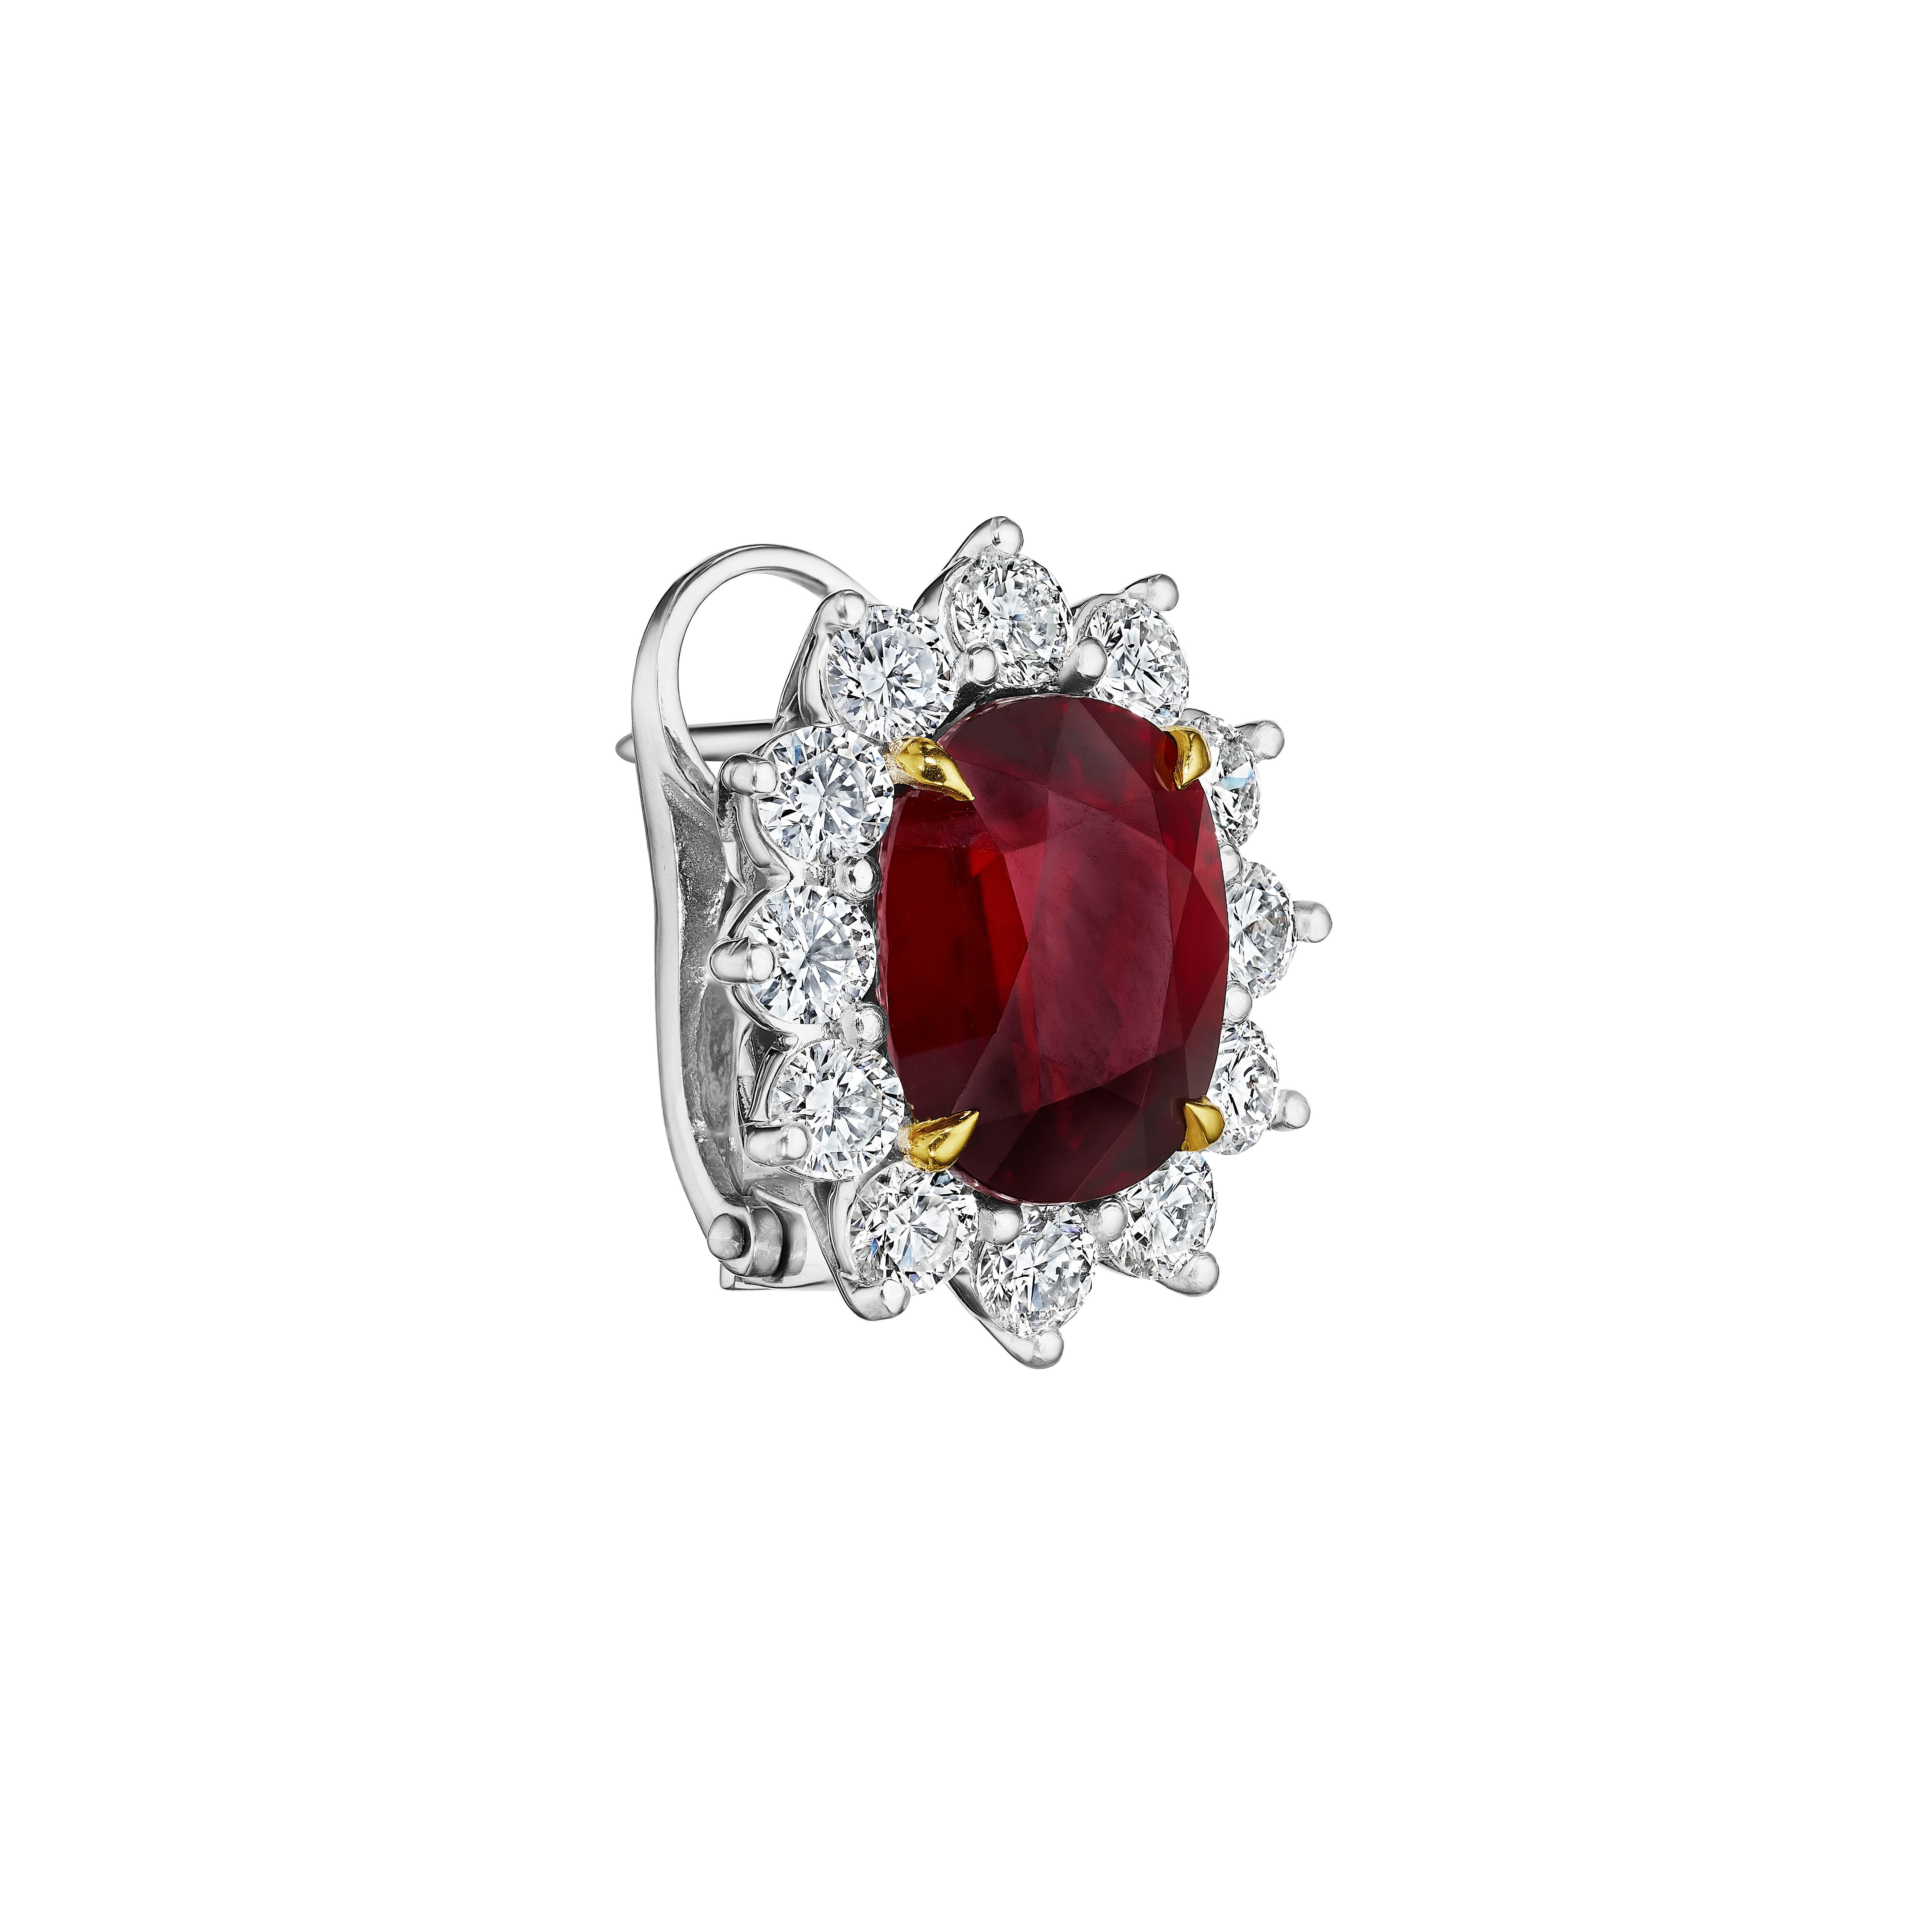 Cushion Cut 10.23ct Certified Natural Cushion Ruby & Diamond Halo Earrings in Platinum & 18K For Sale